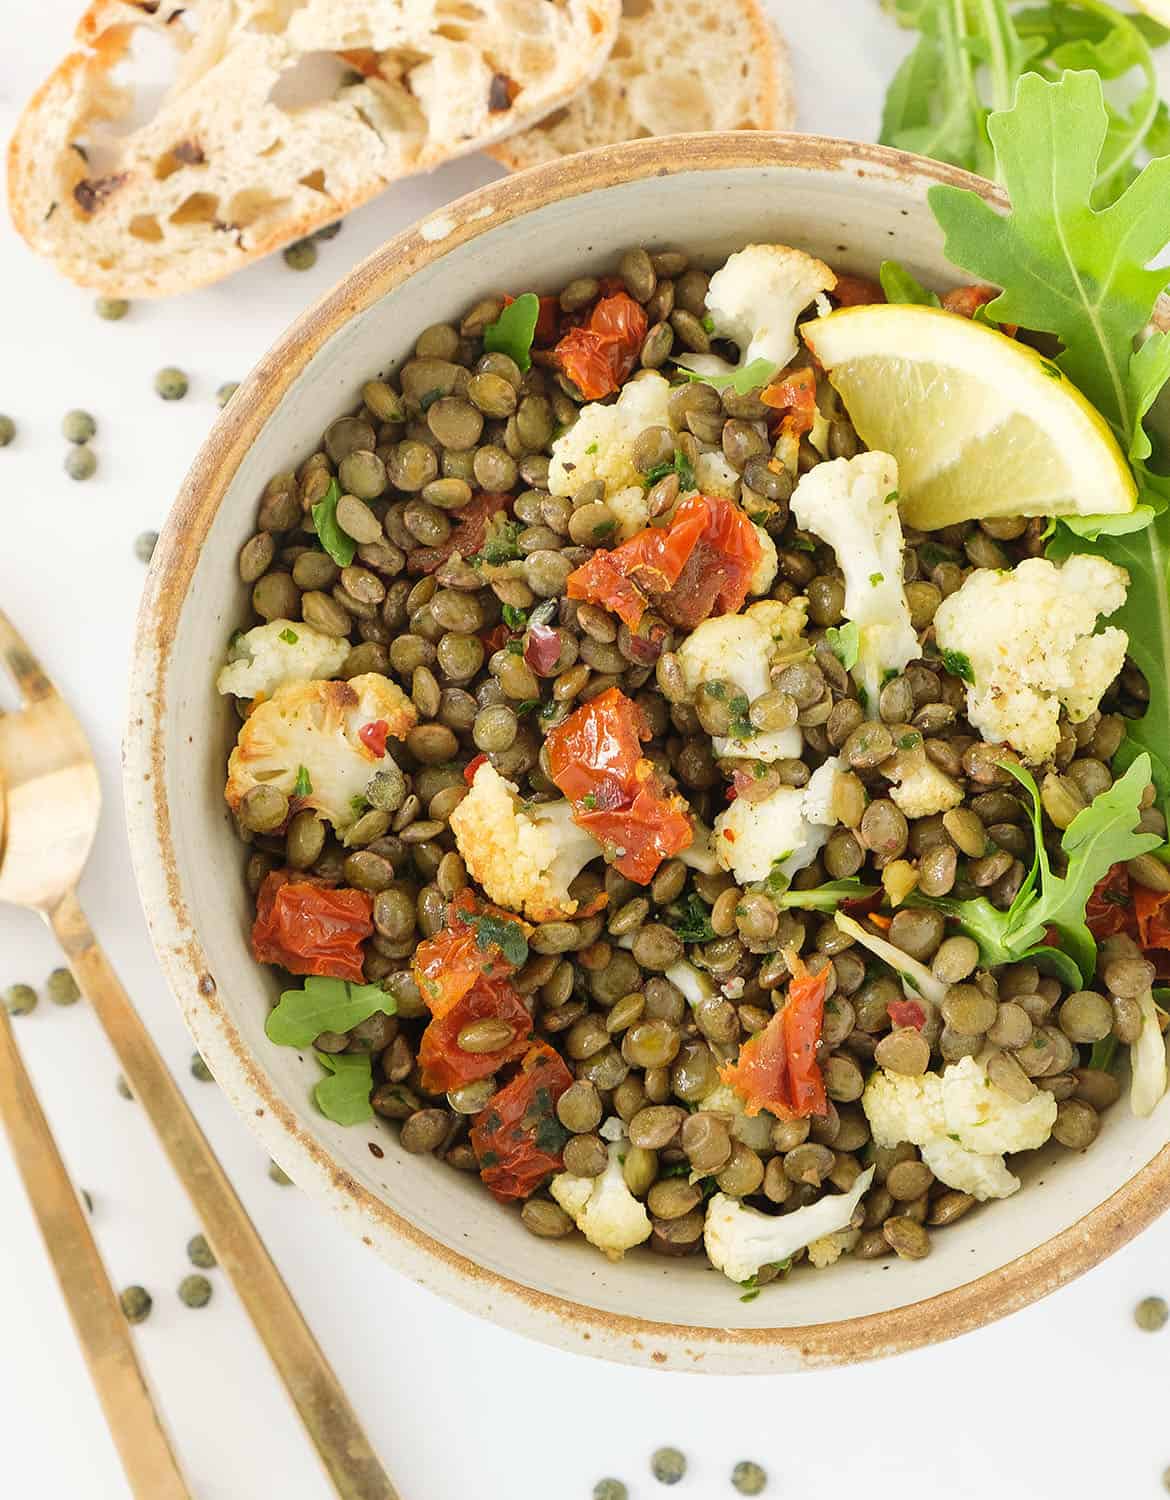 Green Lentil Recipes 25 Delicious Ideas The Clever Meal